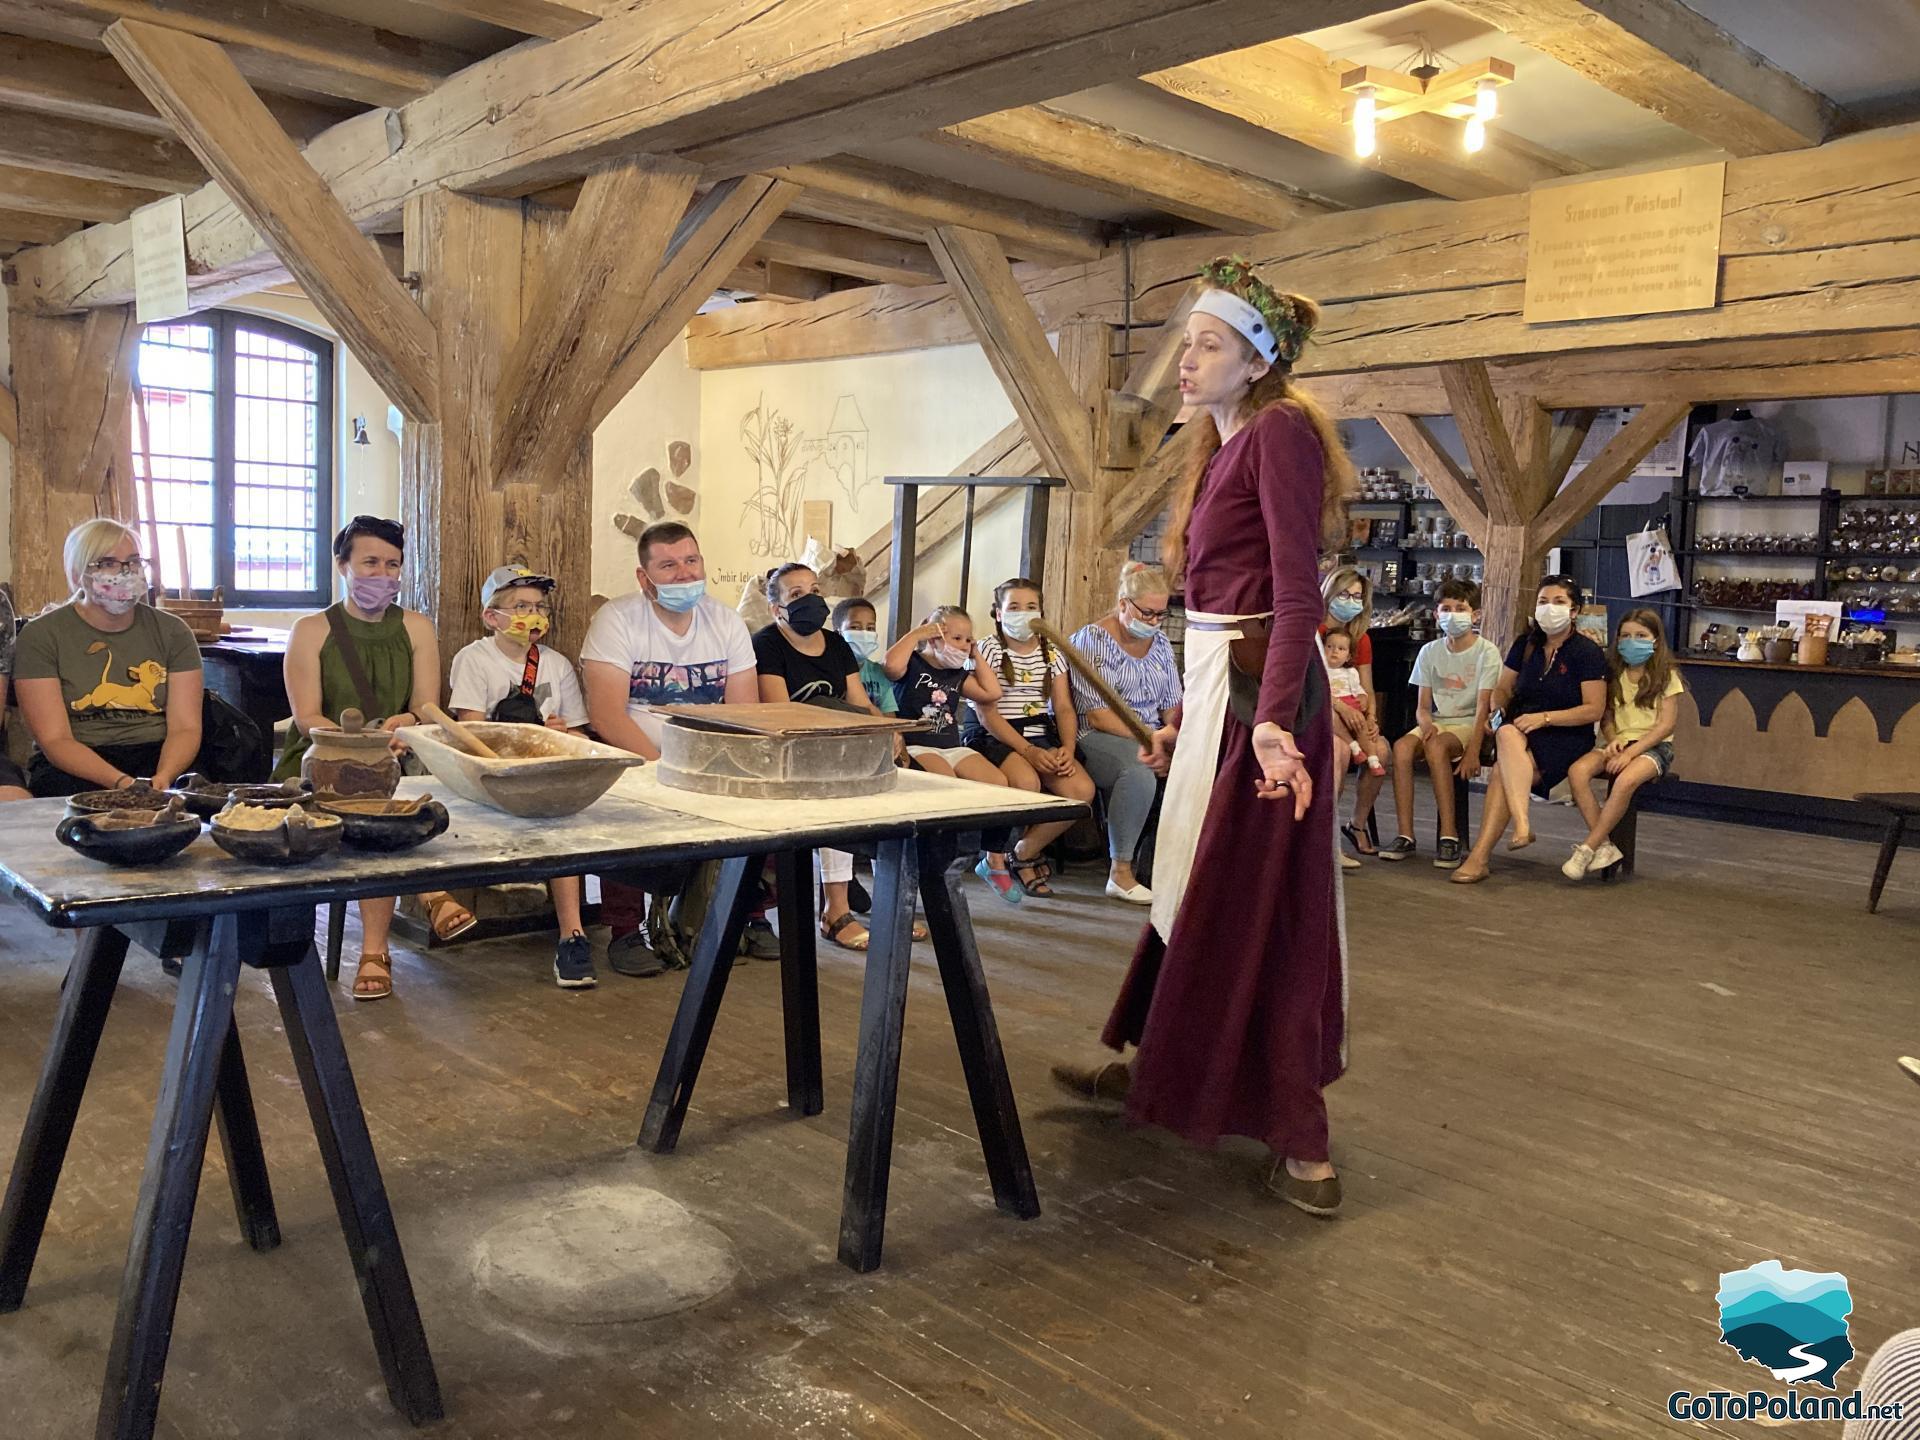 there are many tourists in the room who participate in gingerbread baking, the woman conducting the classes is wearing a flower wreath and a long burgundy dress